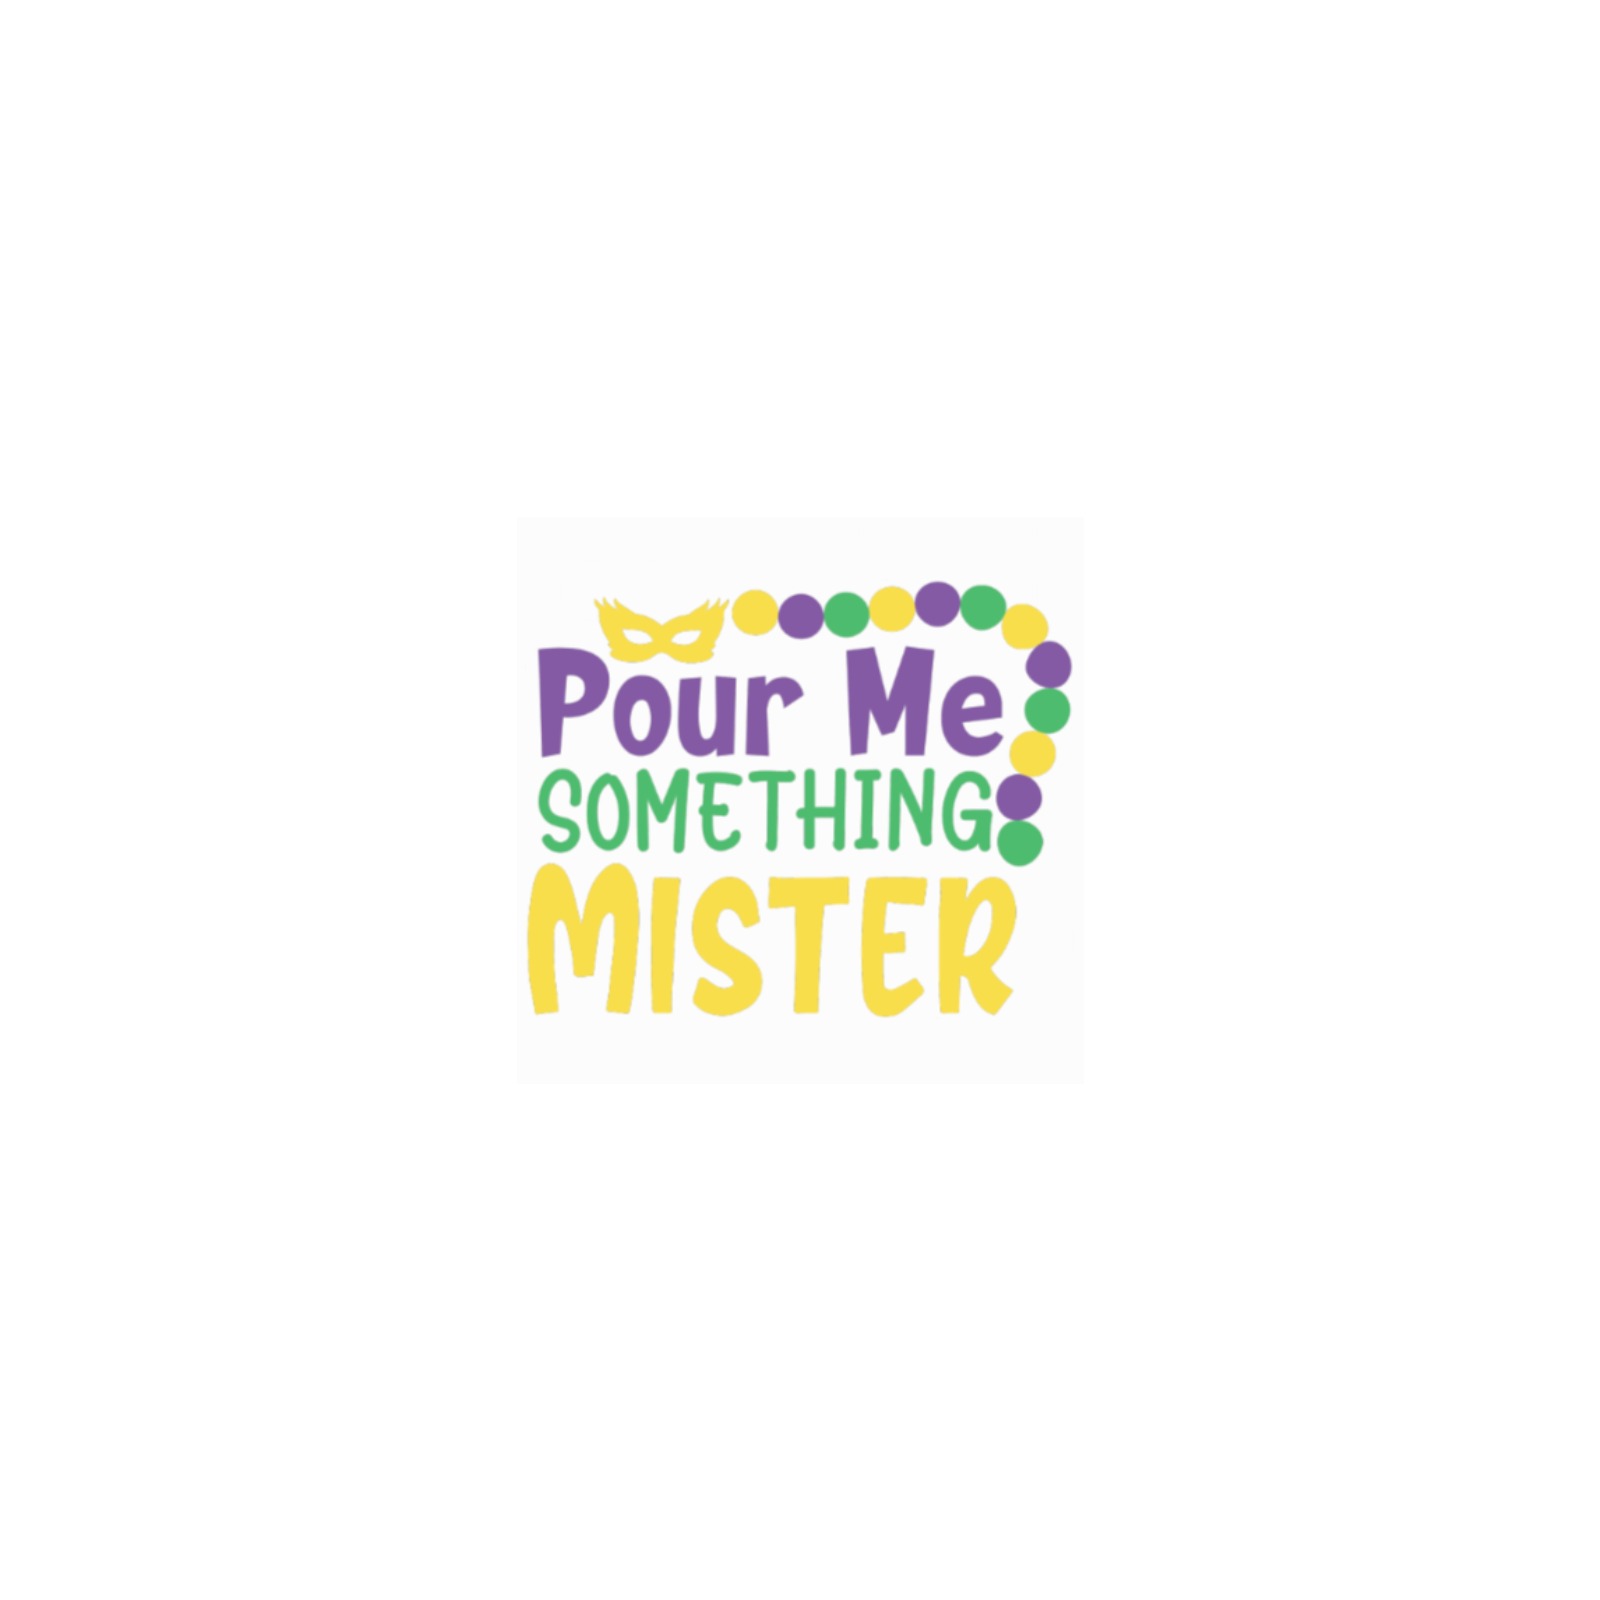 Pour Me Something Mister Personalized Temporary Tattoo (15 Pieces)